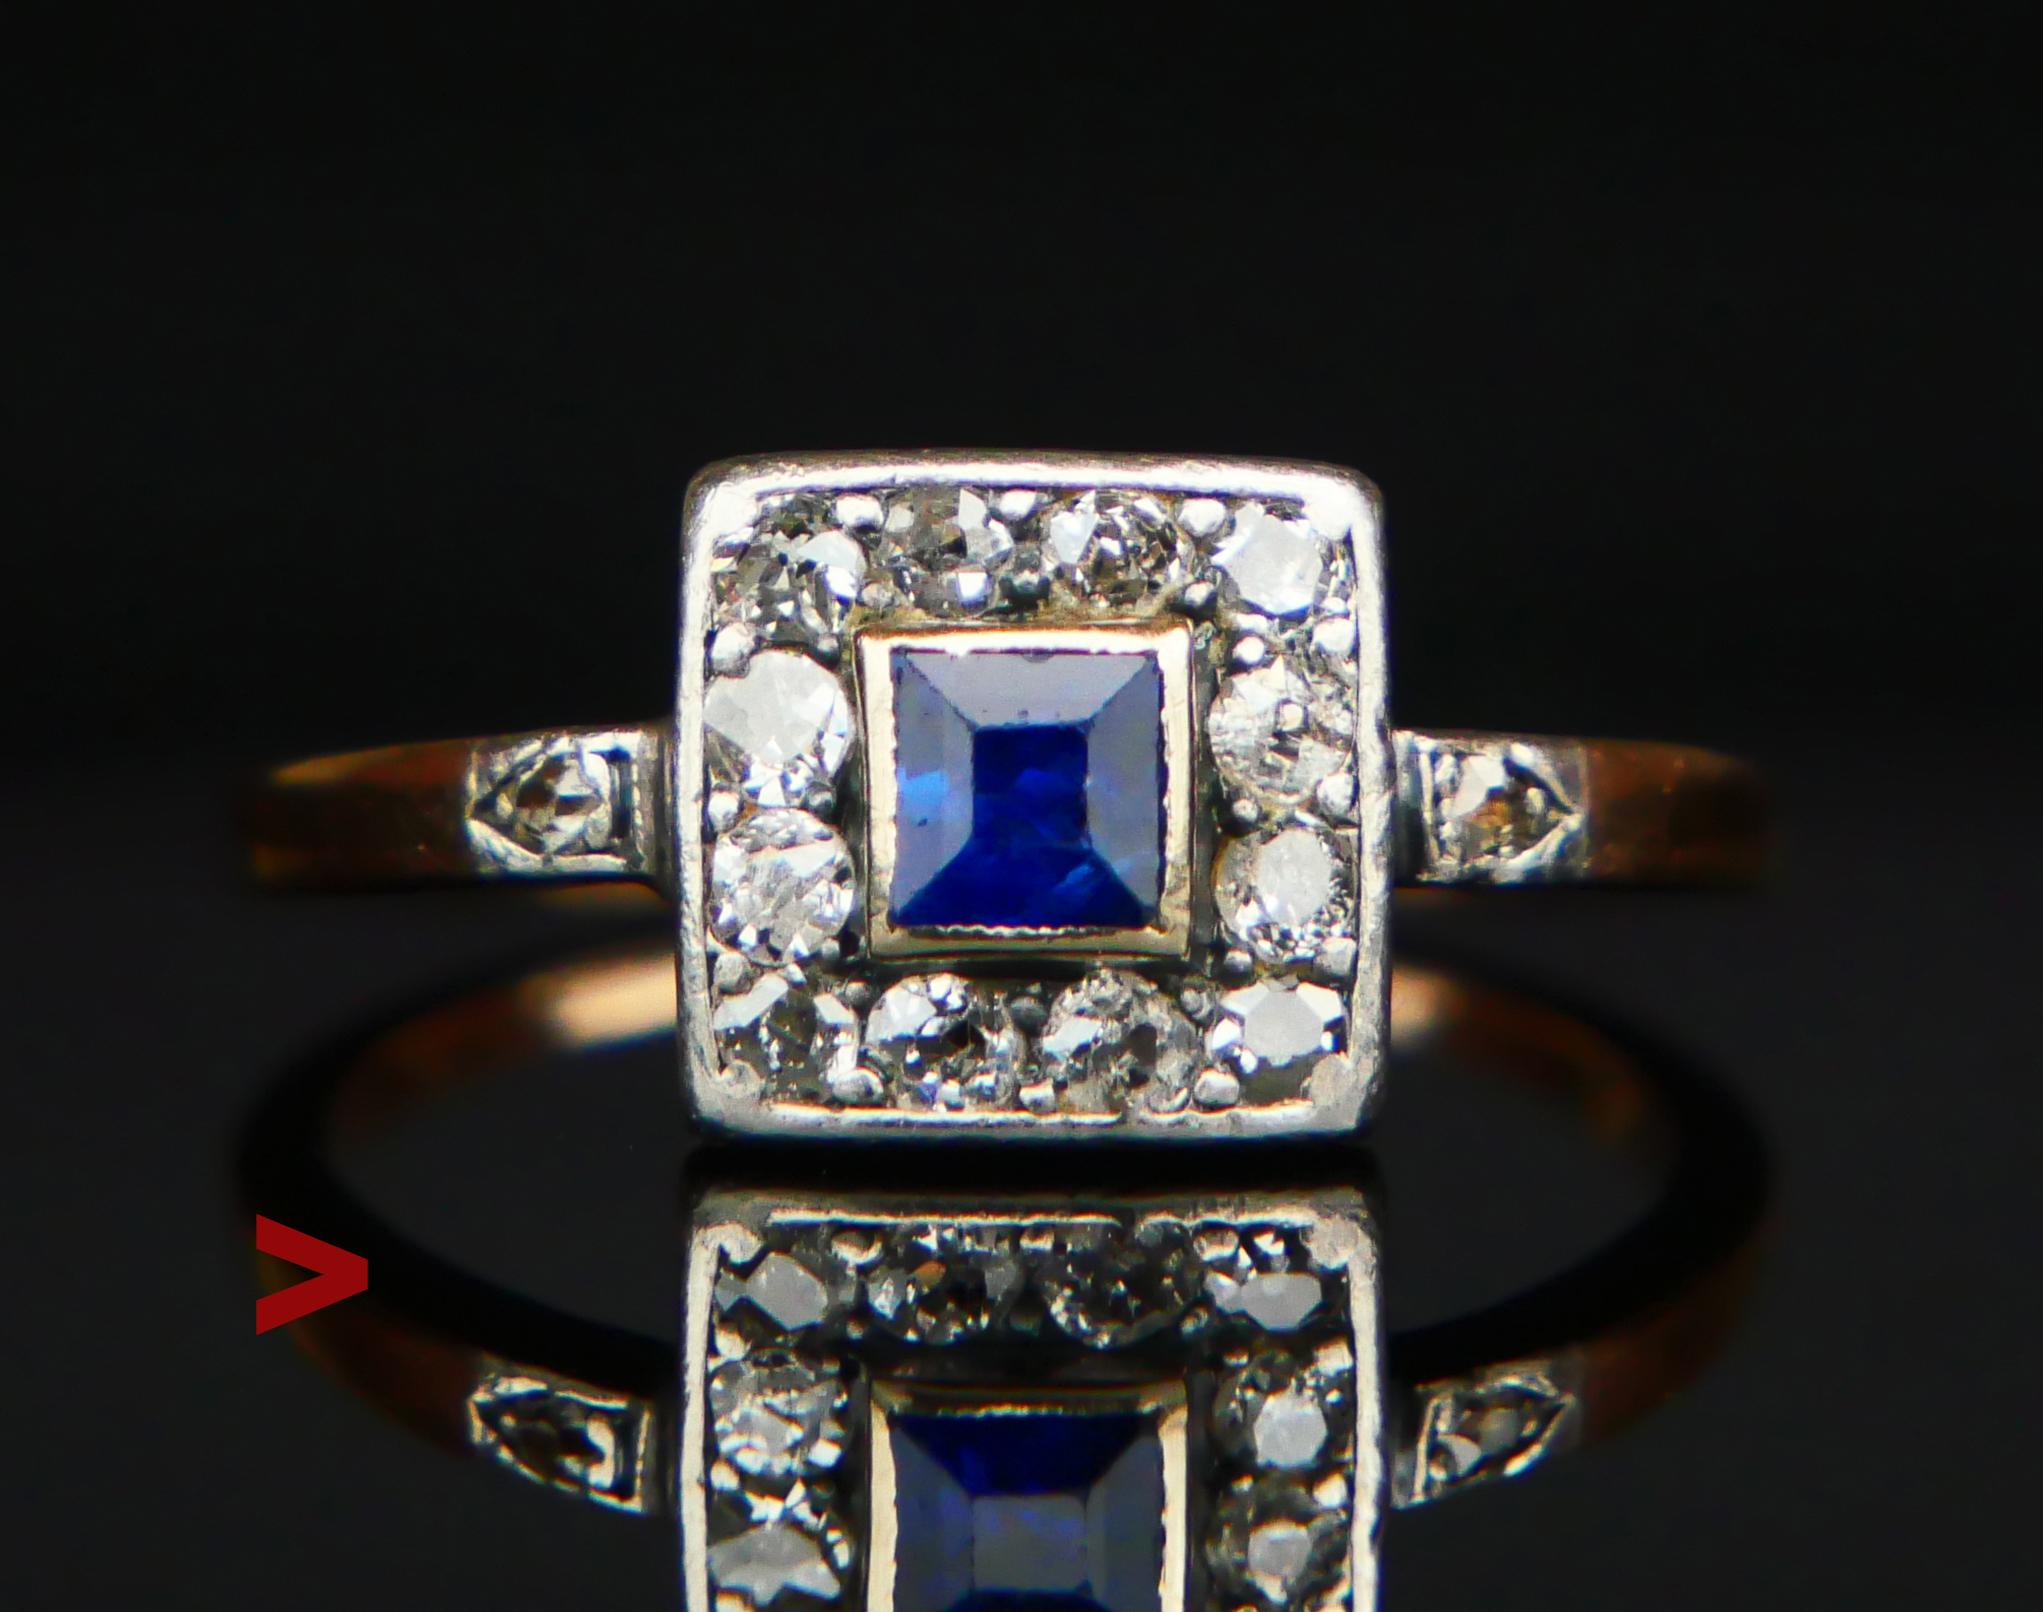 Austrian Art - Deco period Sapphire and Diamonds Ring made between ca. 1920 -1940s. Crown is 9.6 mm x 9.4 mm x 4.25 mm deep with top in White Gold or Silver featuring natural medium blue Sapphire cut princess 4 mm x 4 mm x 2.65 mm deep / ca 0.5ct